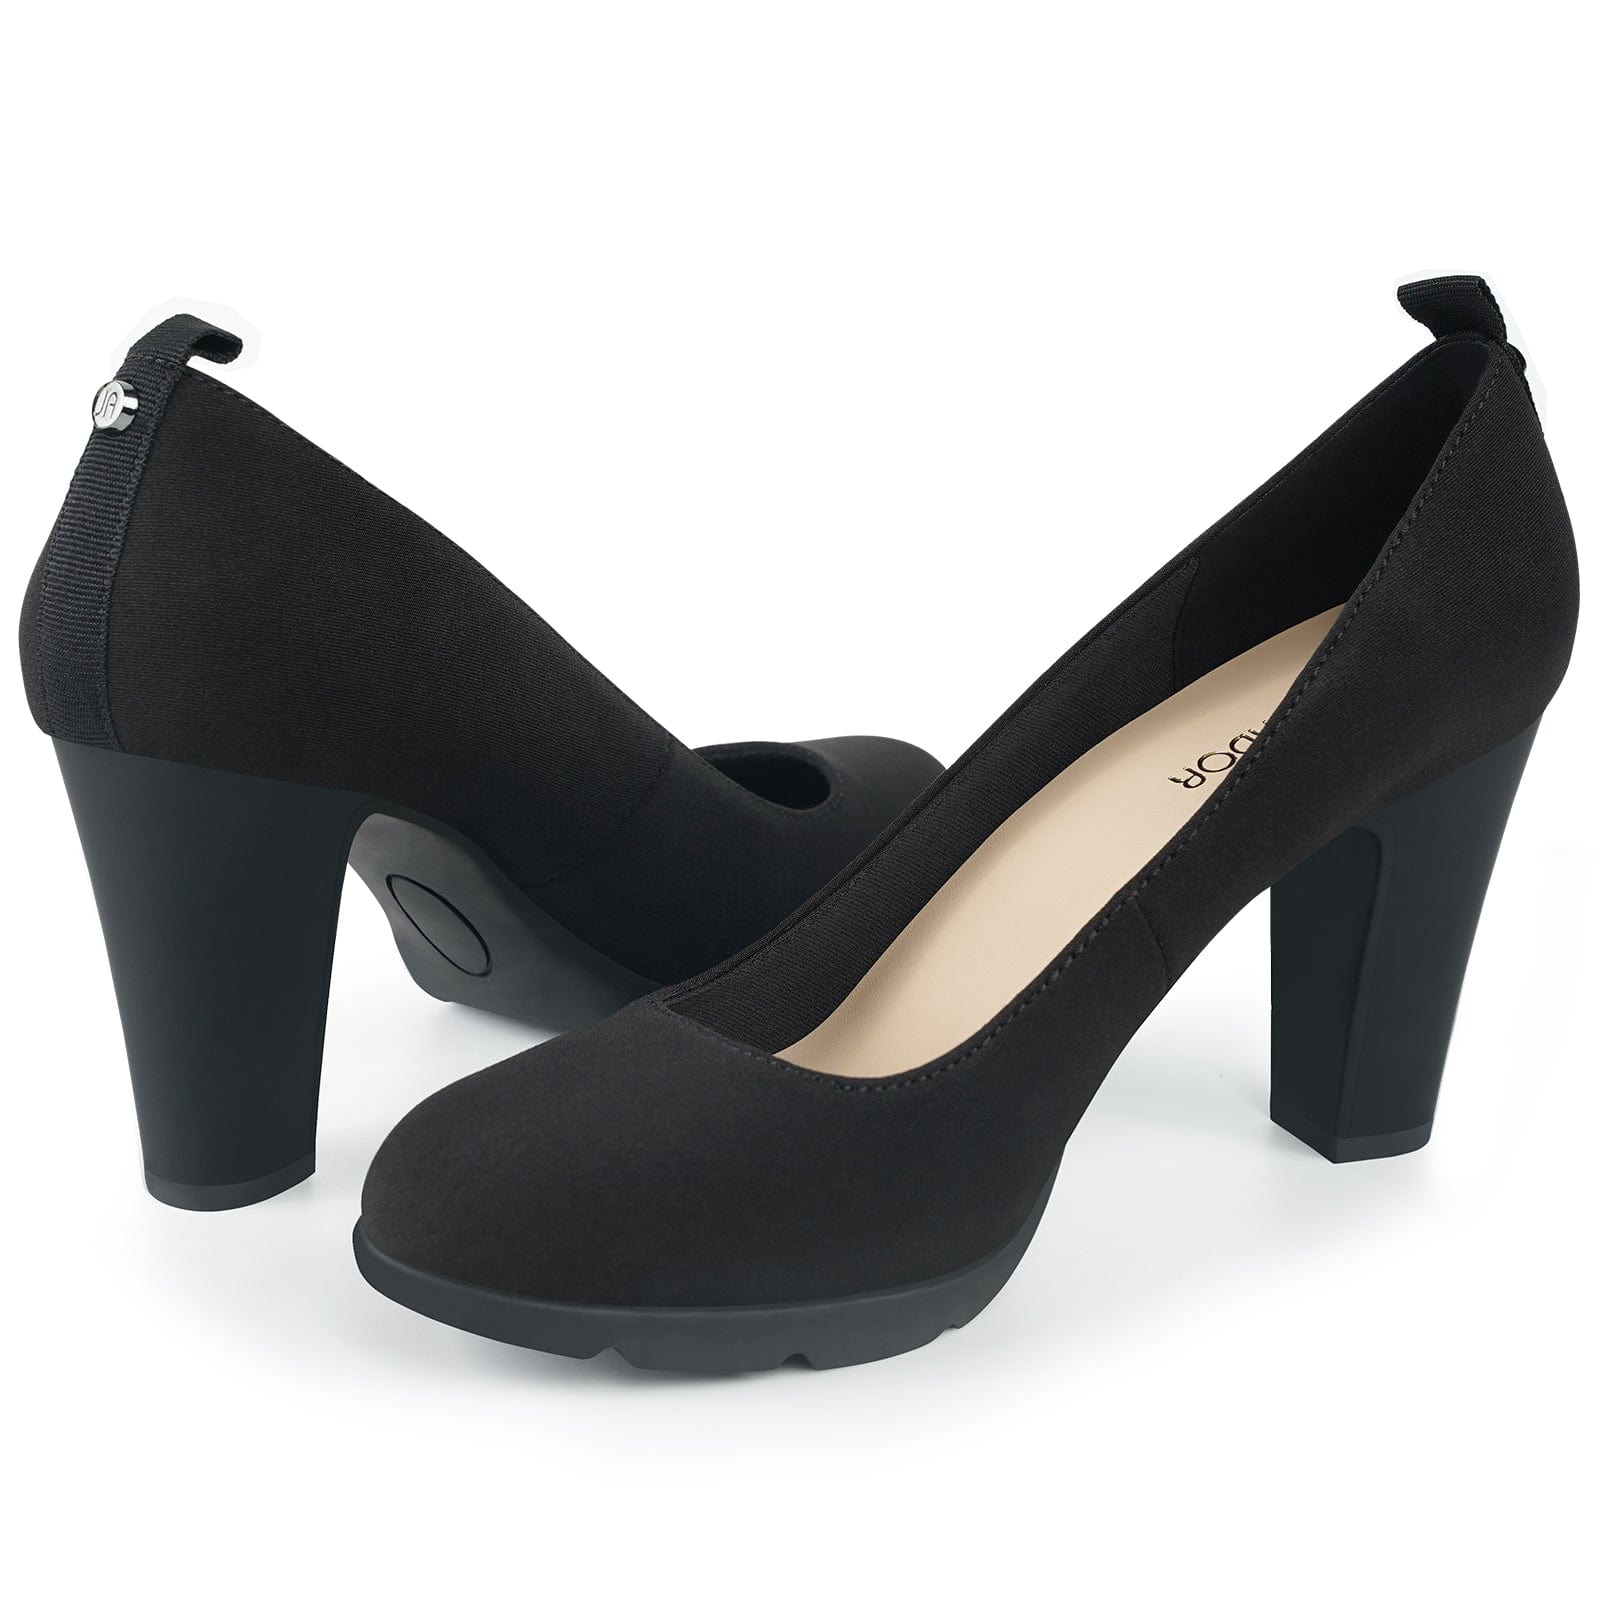 Trib too leather heels Yves Saint Laurent Black size 42 EU in Leather -  40335390